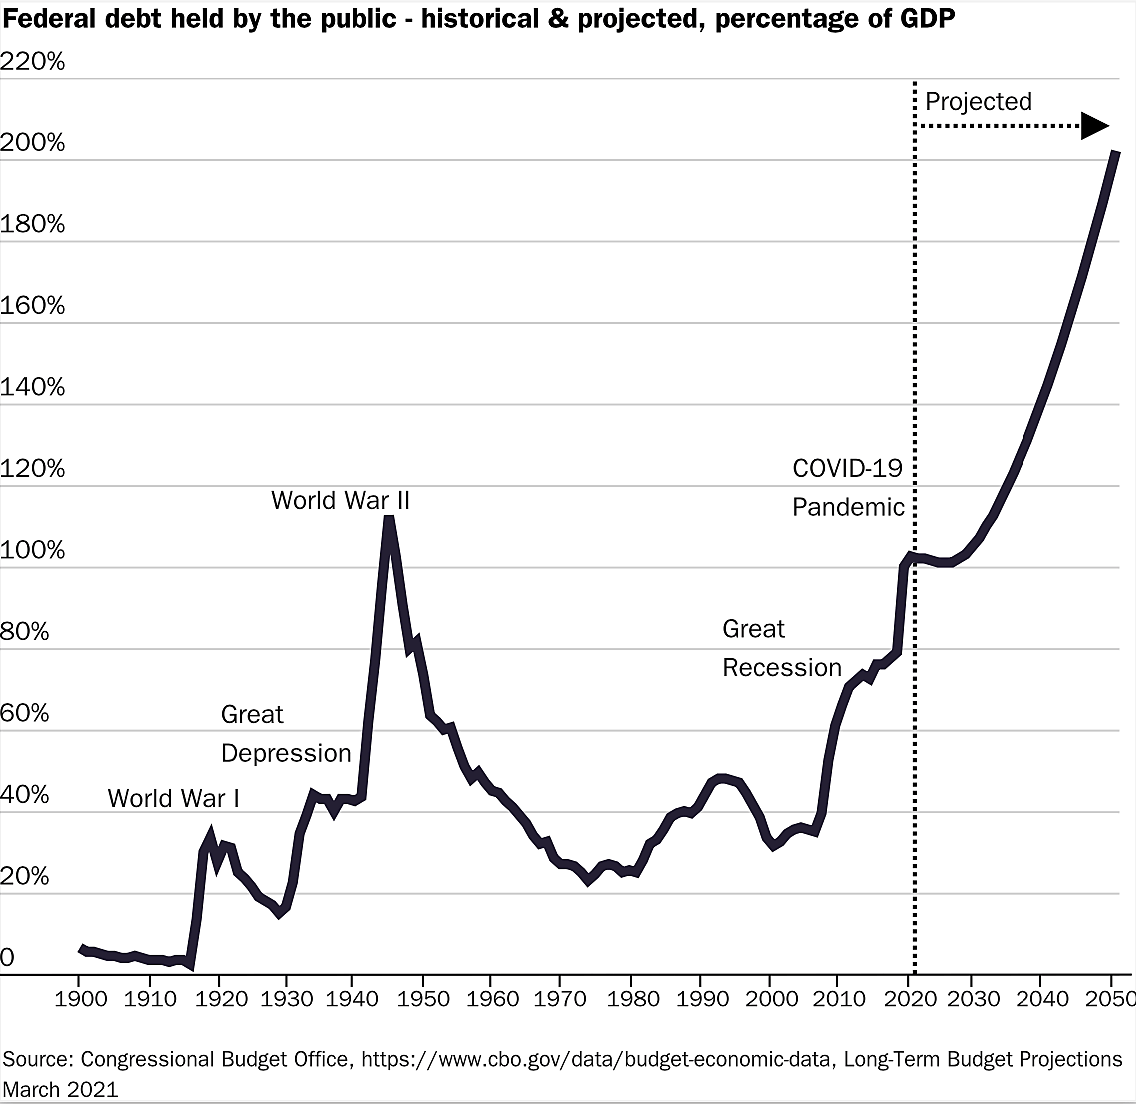 Federal debt projection, percentage of GDP